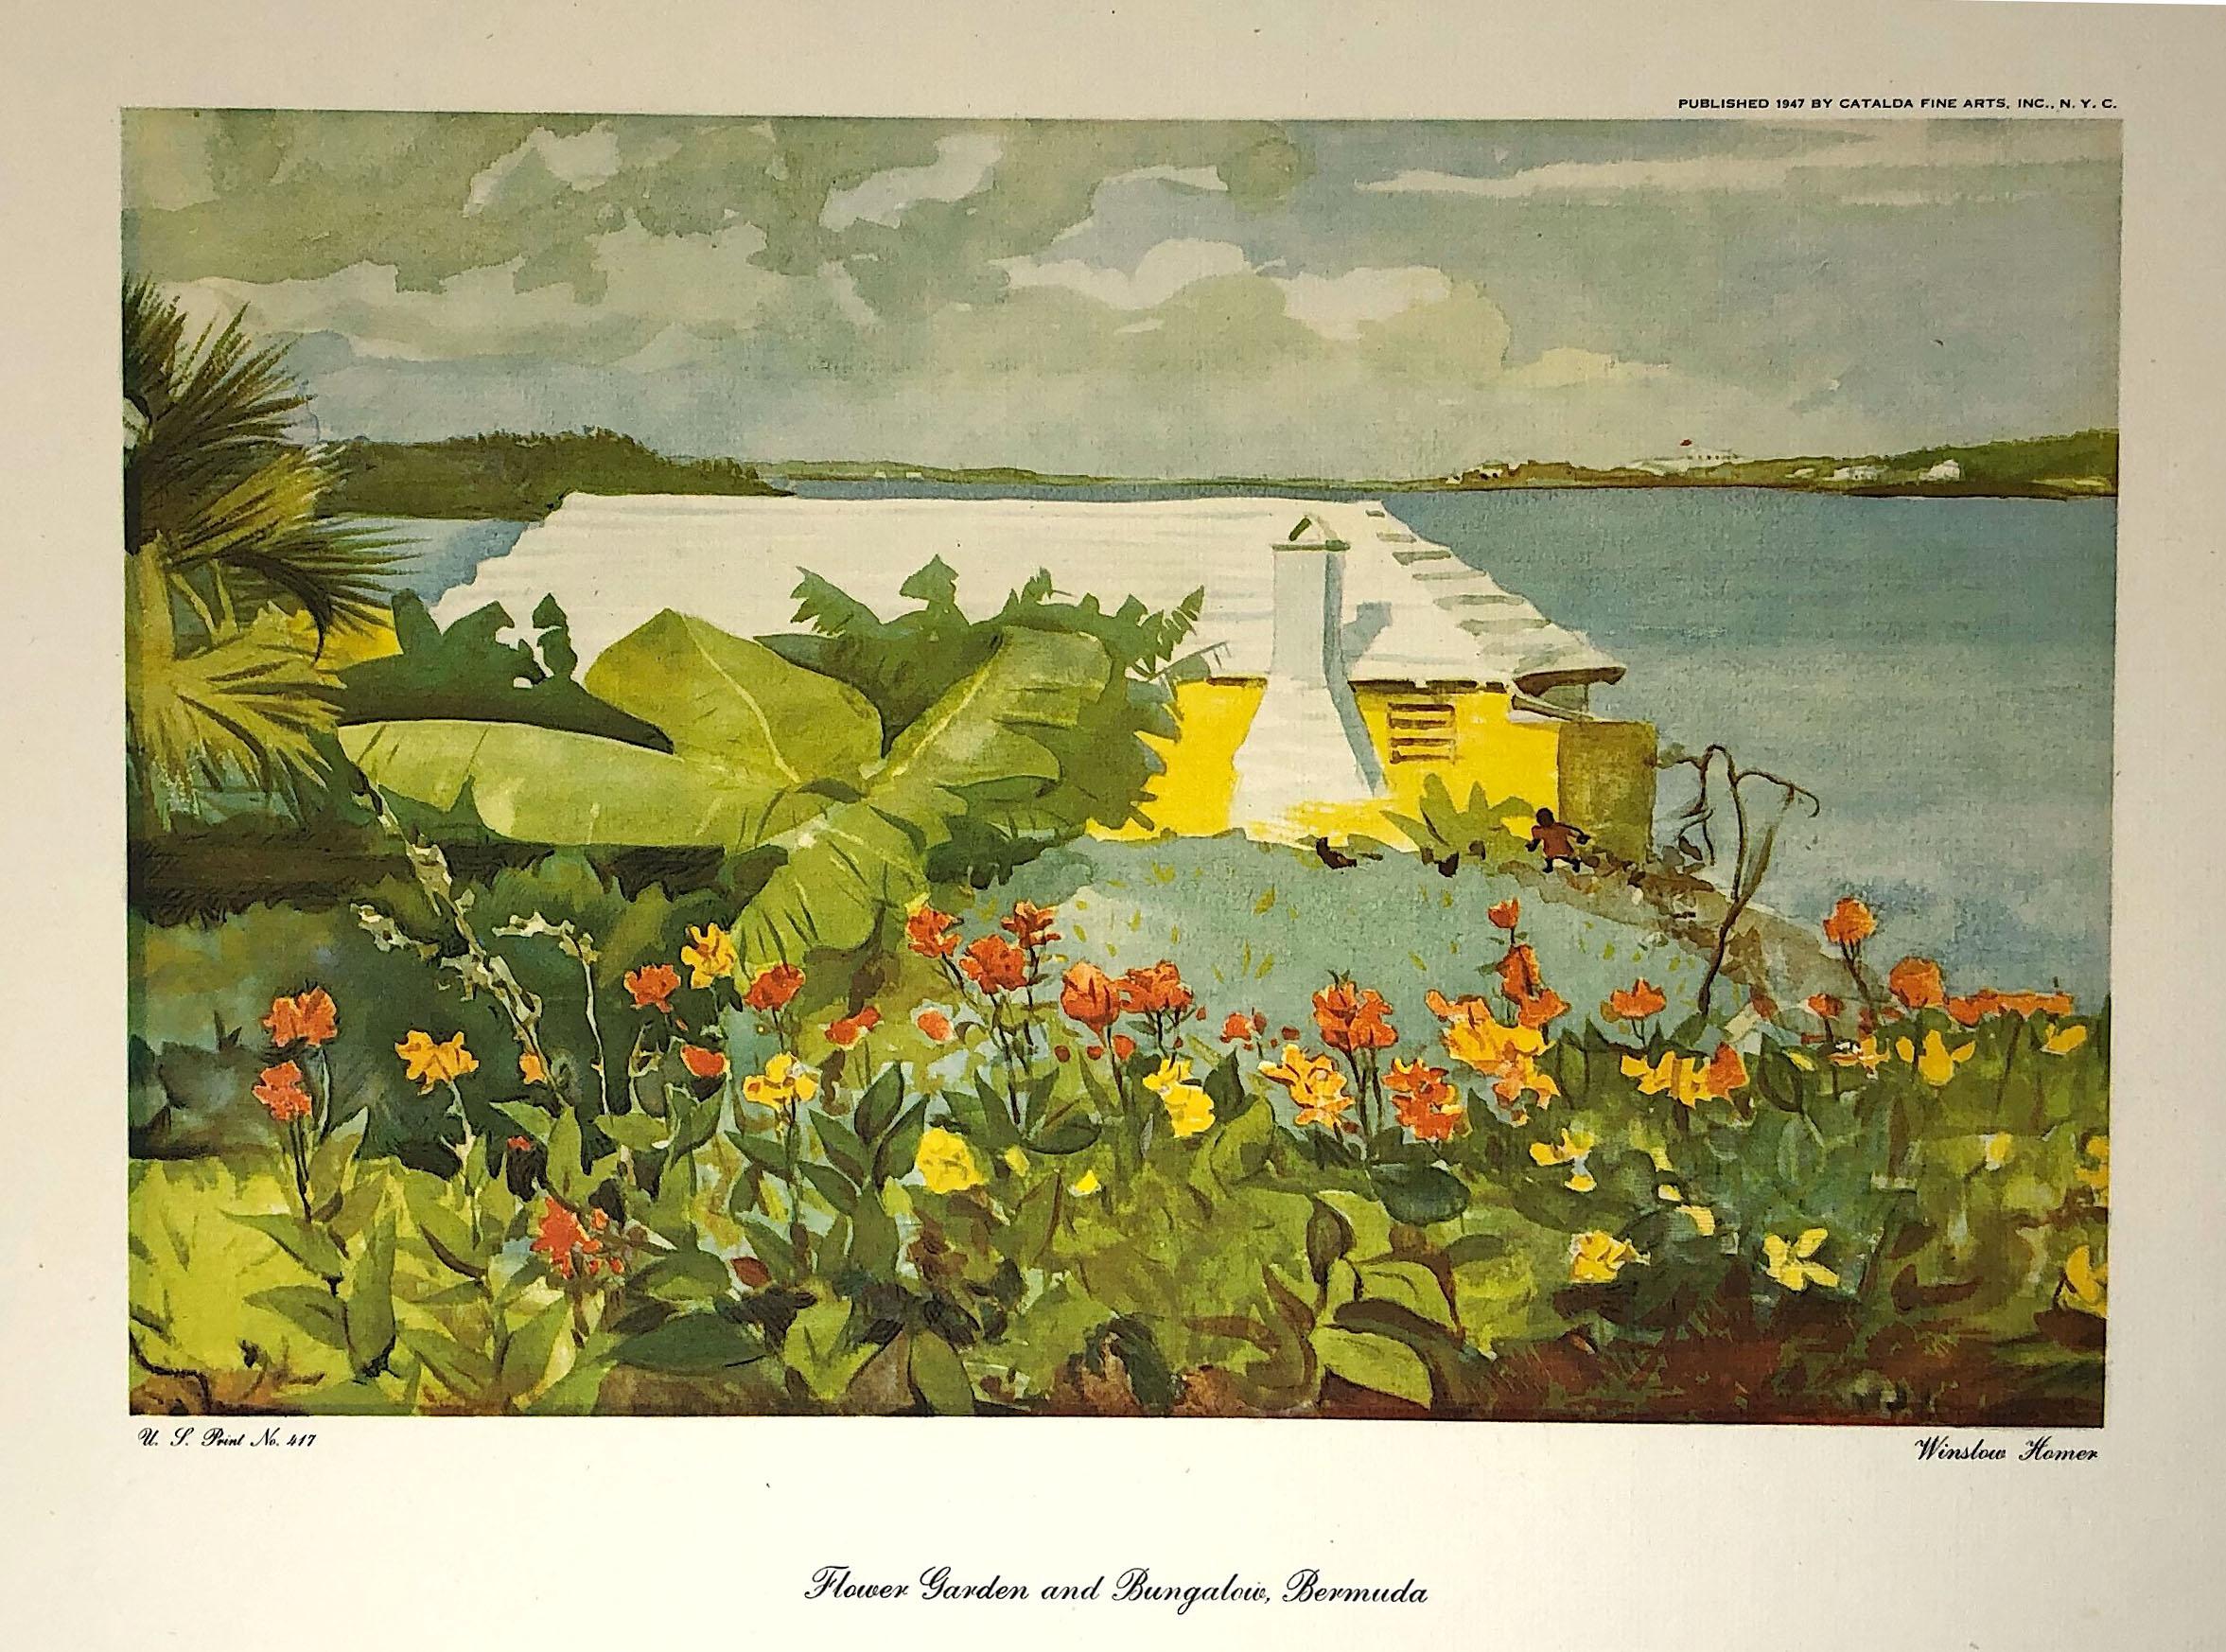 Striking original color lithograph print on paper of Winslow Homer's (1836 - 1910) original watercolor painting titled 